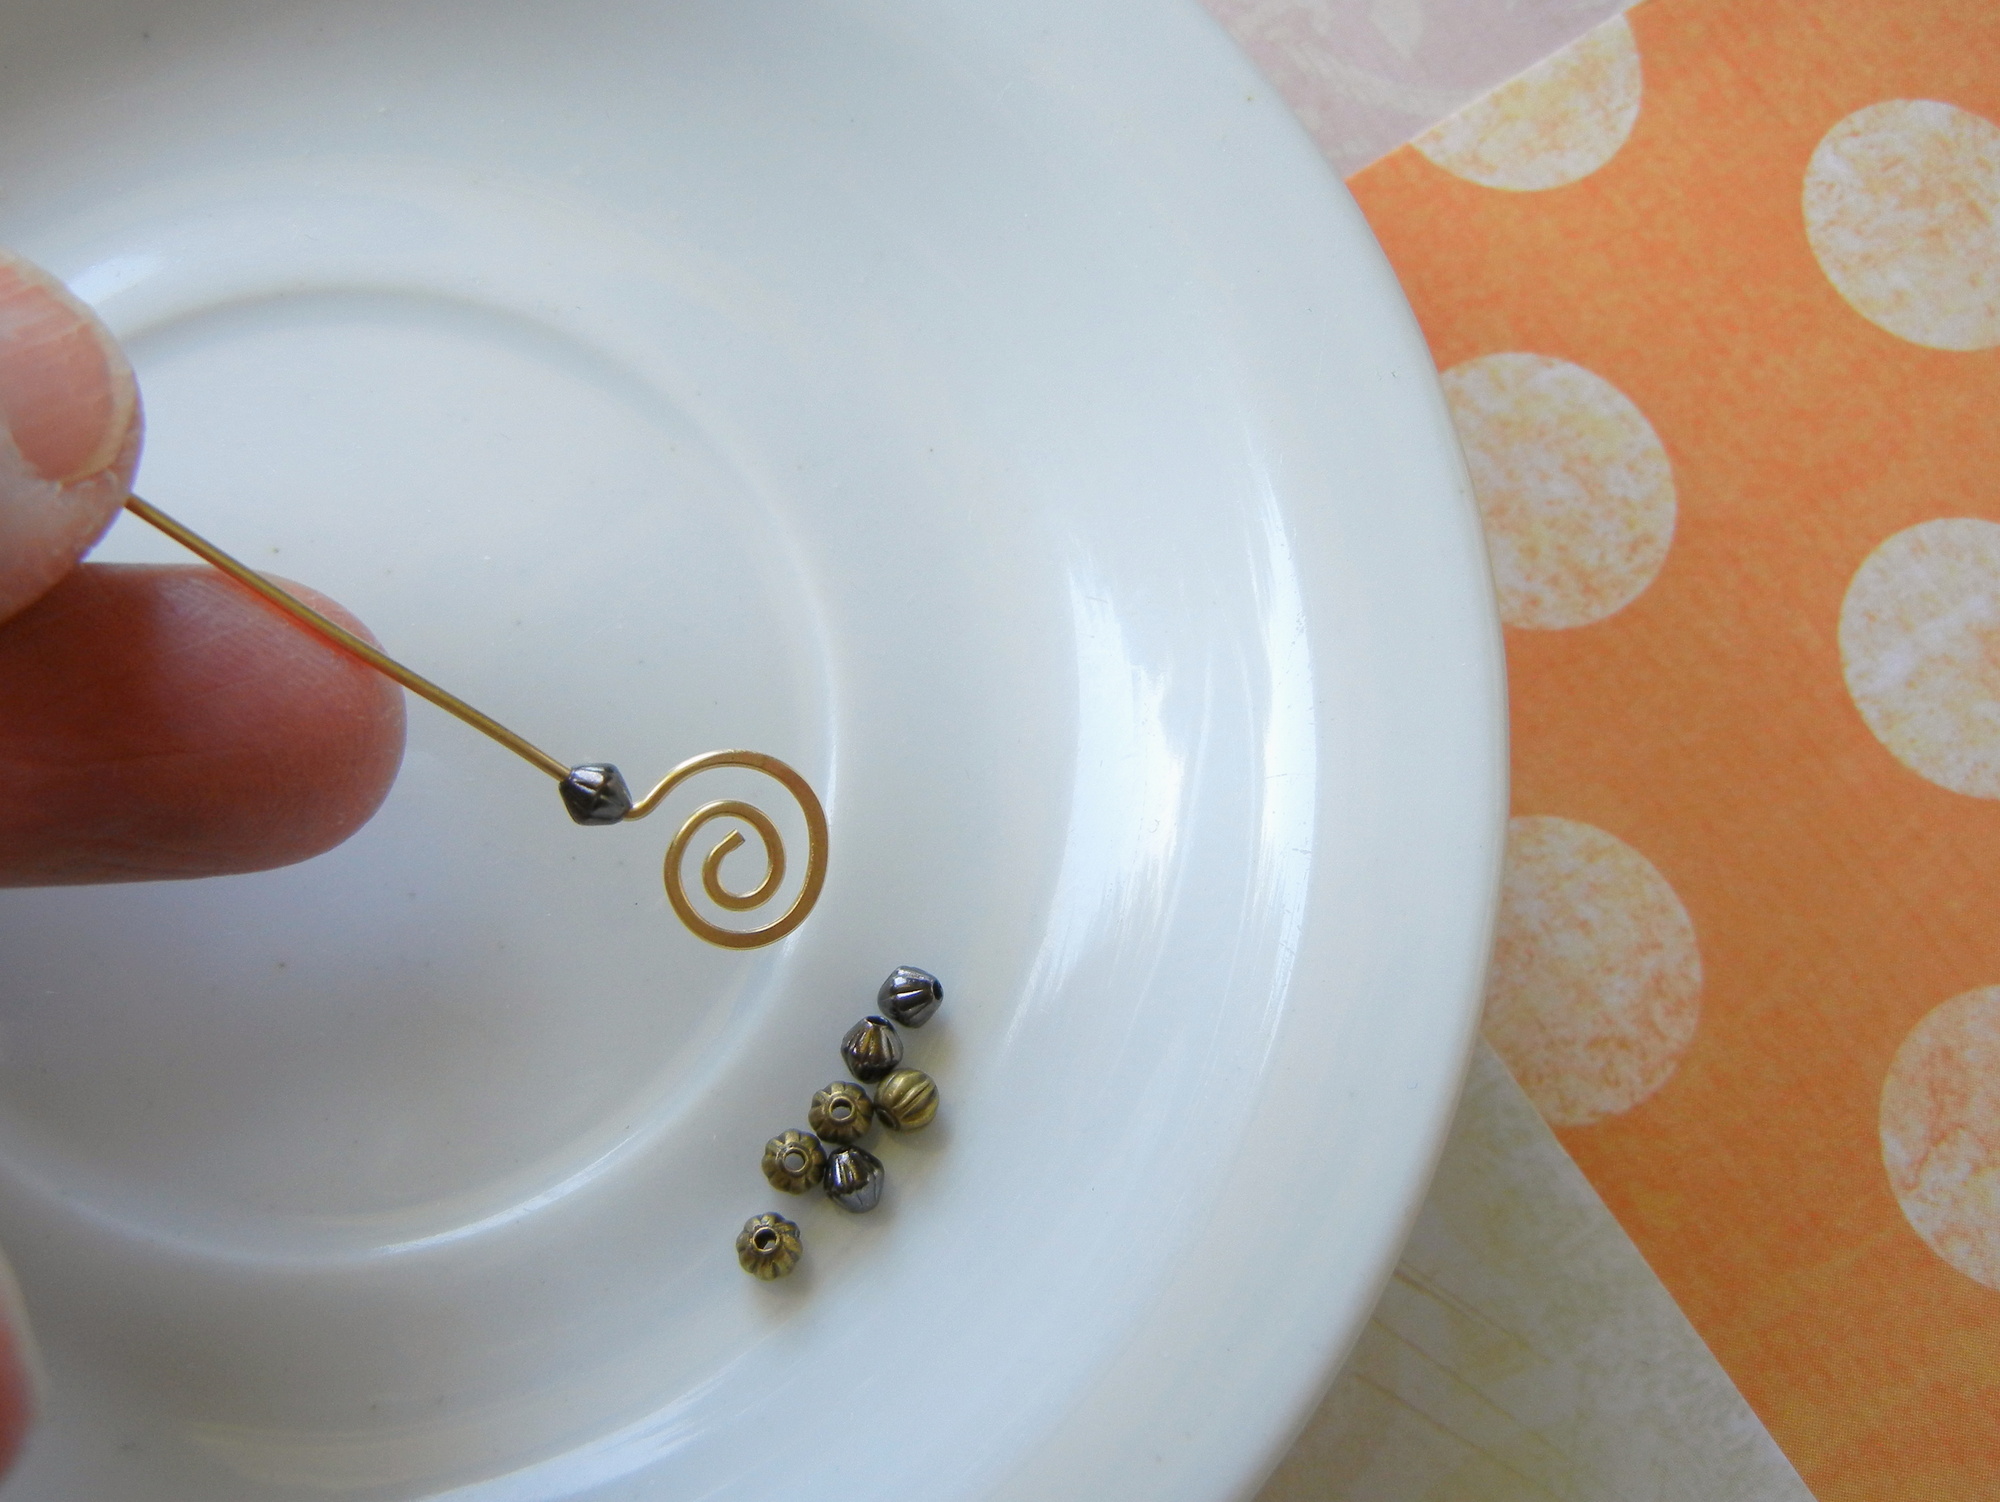 How to Make Spiral Head Pins - Rings and ThingsRings and Things